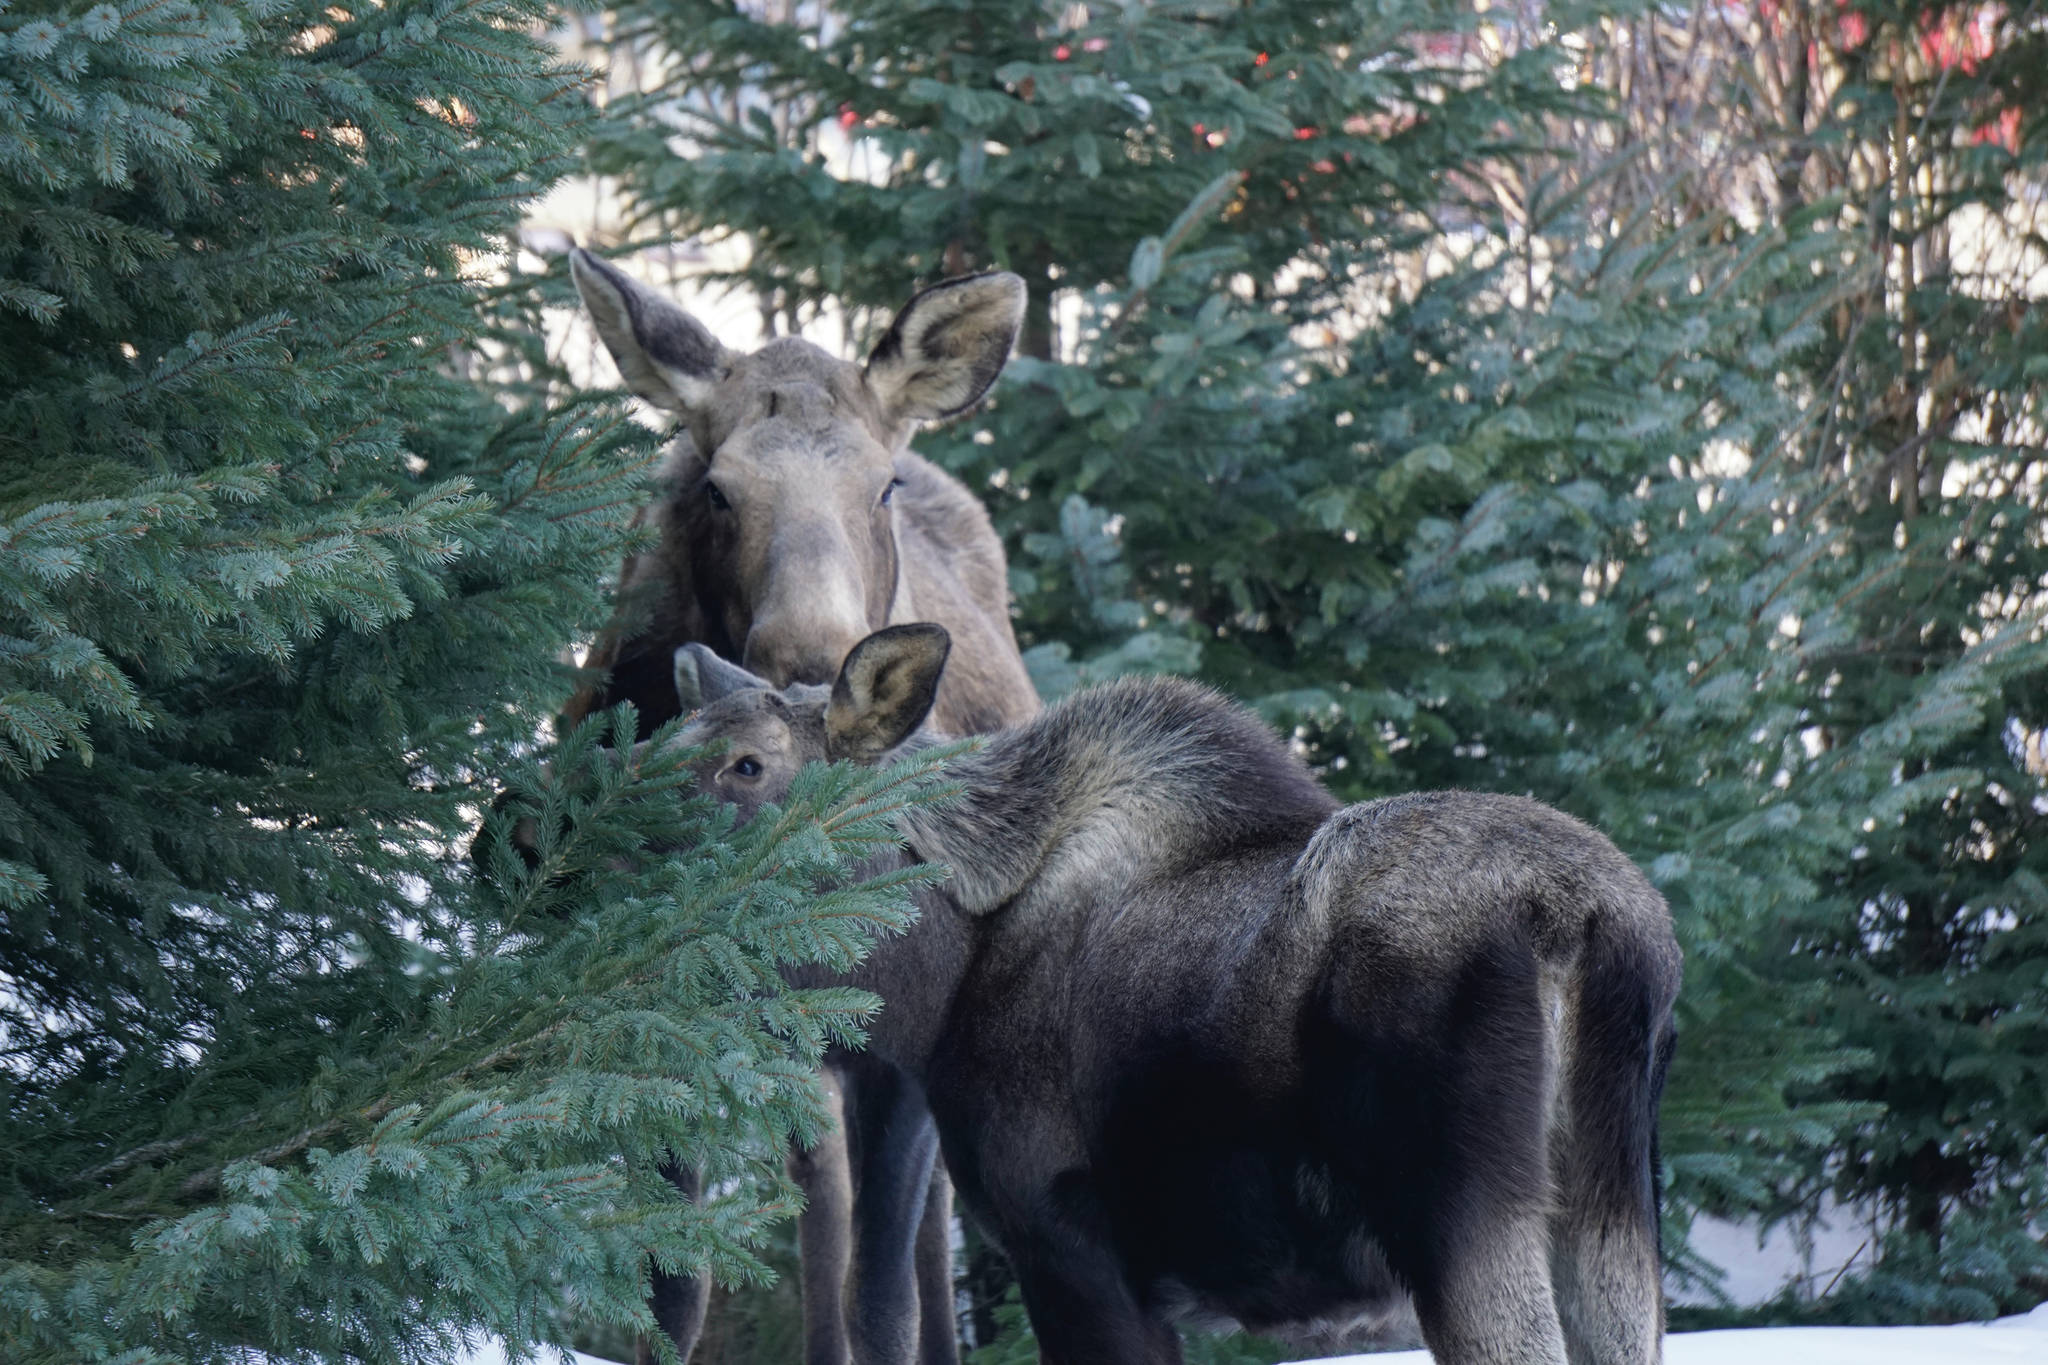 A cow moose and calf stand by spruce trees on Tuesday, March 23, 2021, near the Homer News in Homer, Alaska. (Photo by Michael Armstrong/Homer News)